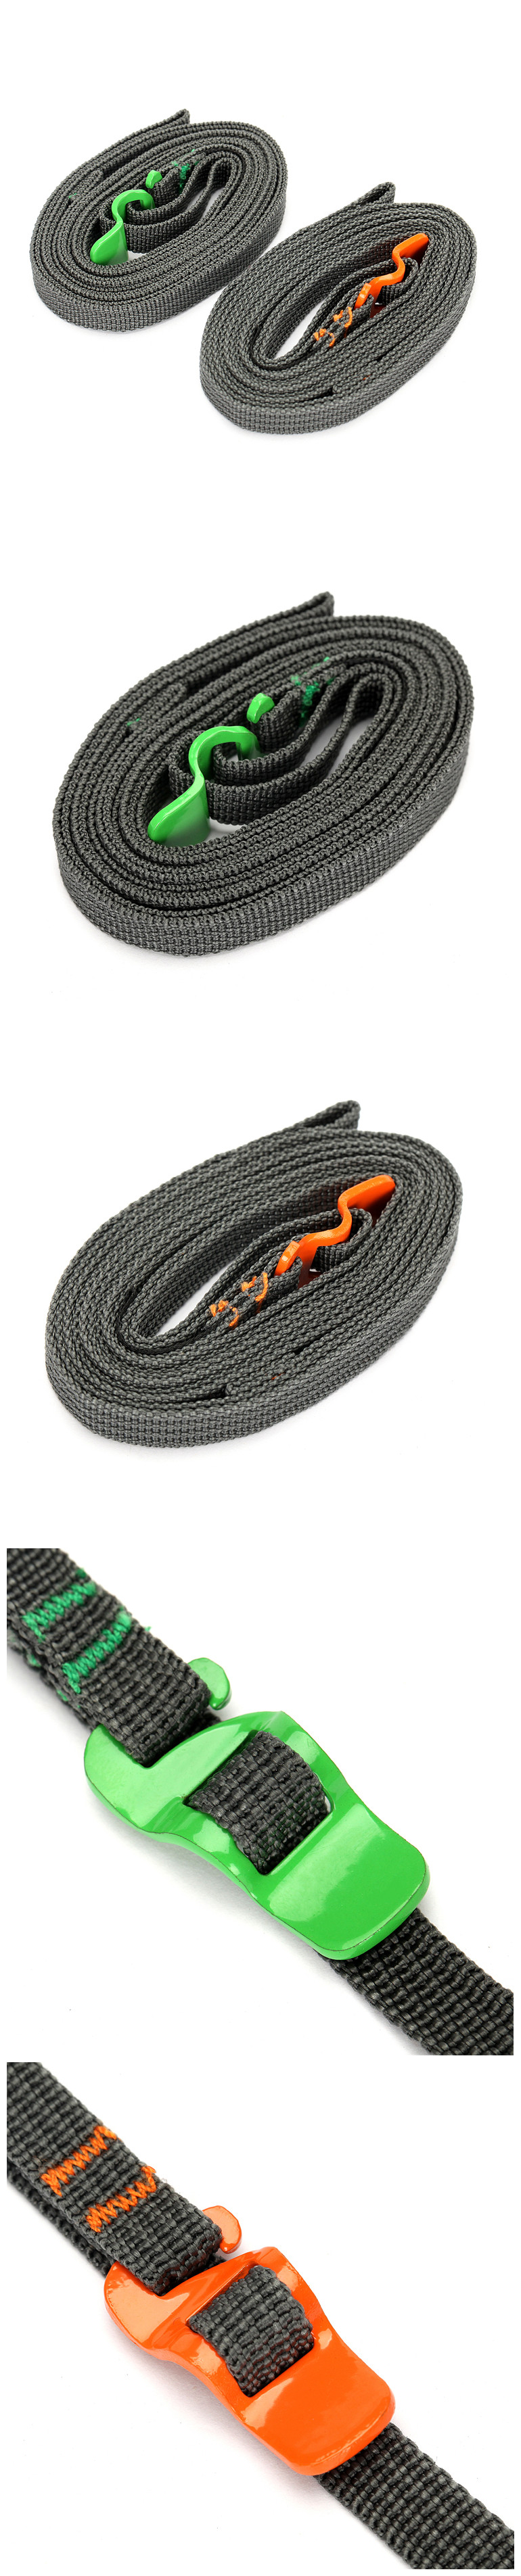 Outdoor-Camp-Binding-Rope-Tie-Up-Ribbon-Adjustable-Puller-Strap-With-Buckle-Hook-For-Travel-Luggage-1059324-1